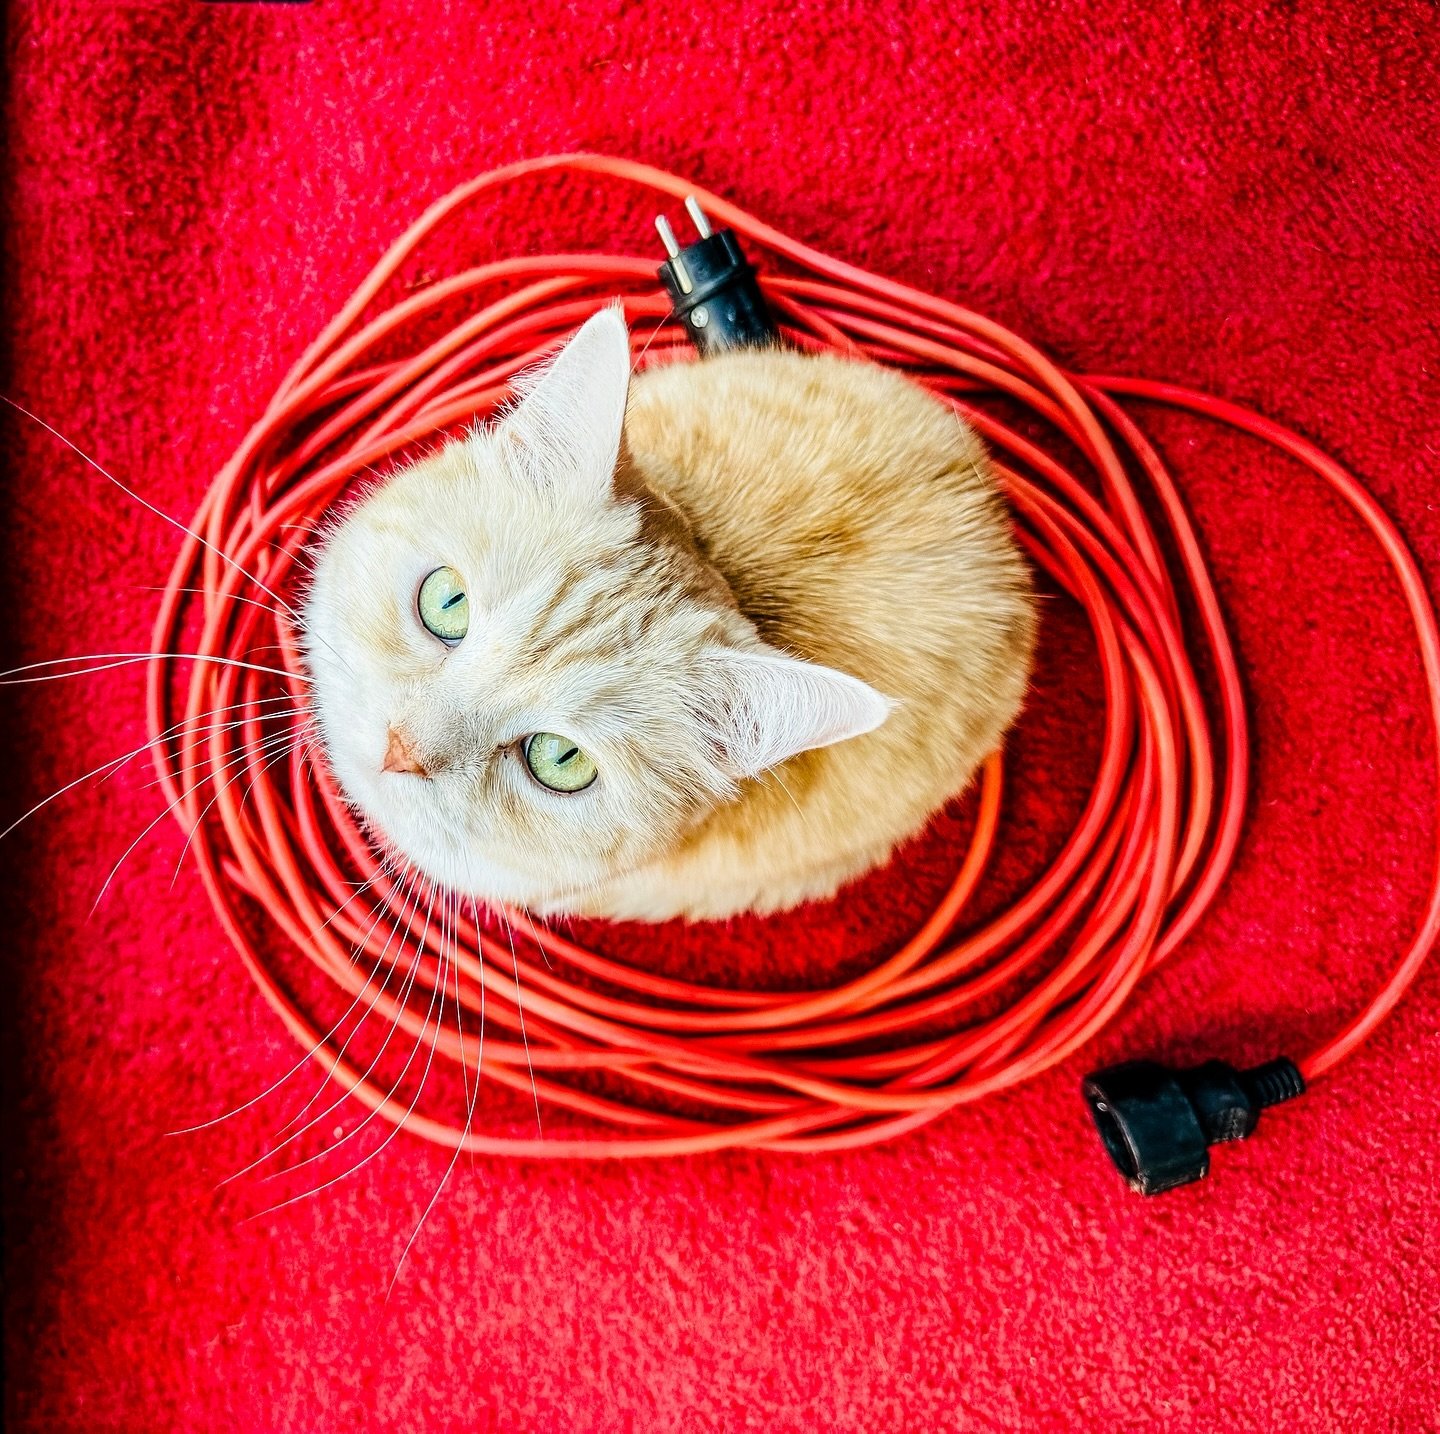 Cable Cat. Maybe Shirin wants to go on tour with us?

#schiller #catlover #redcarpet #voyage #thejourneycontinues #happiness #shirin #schillermusic